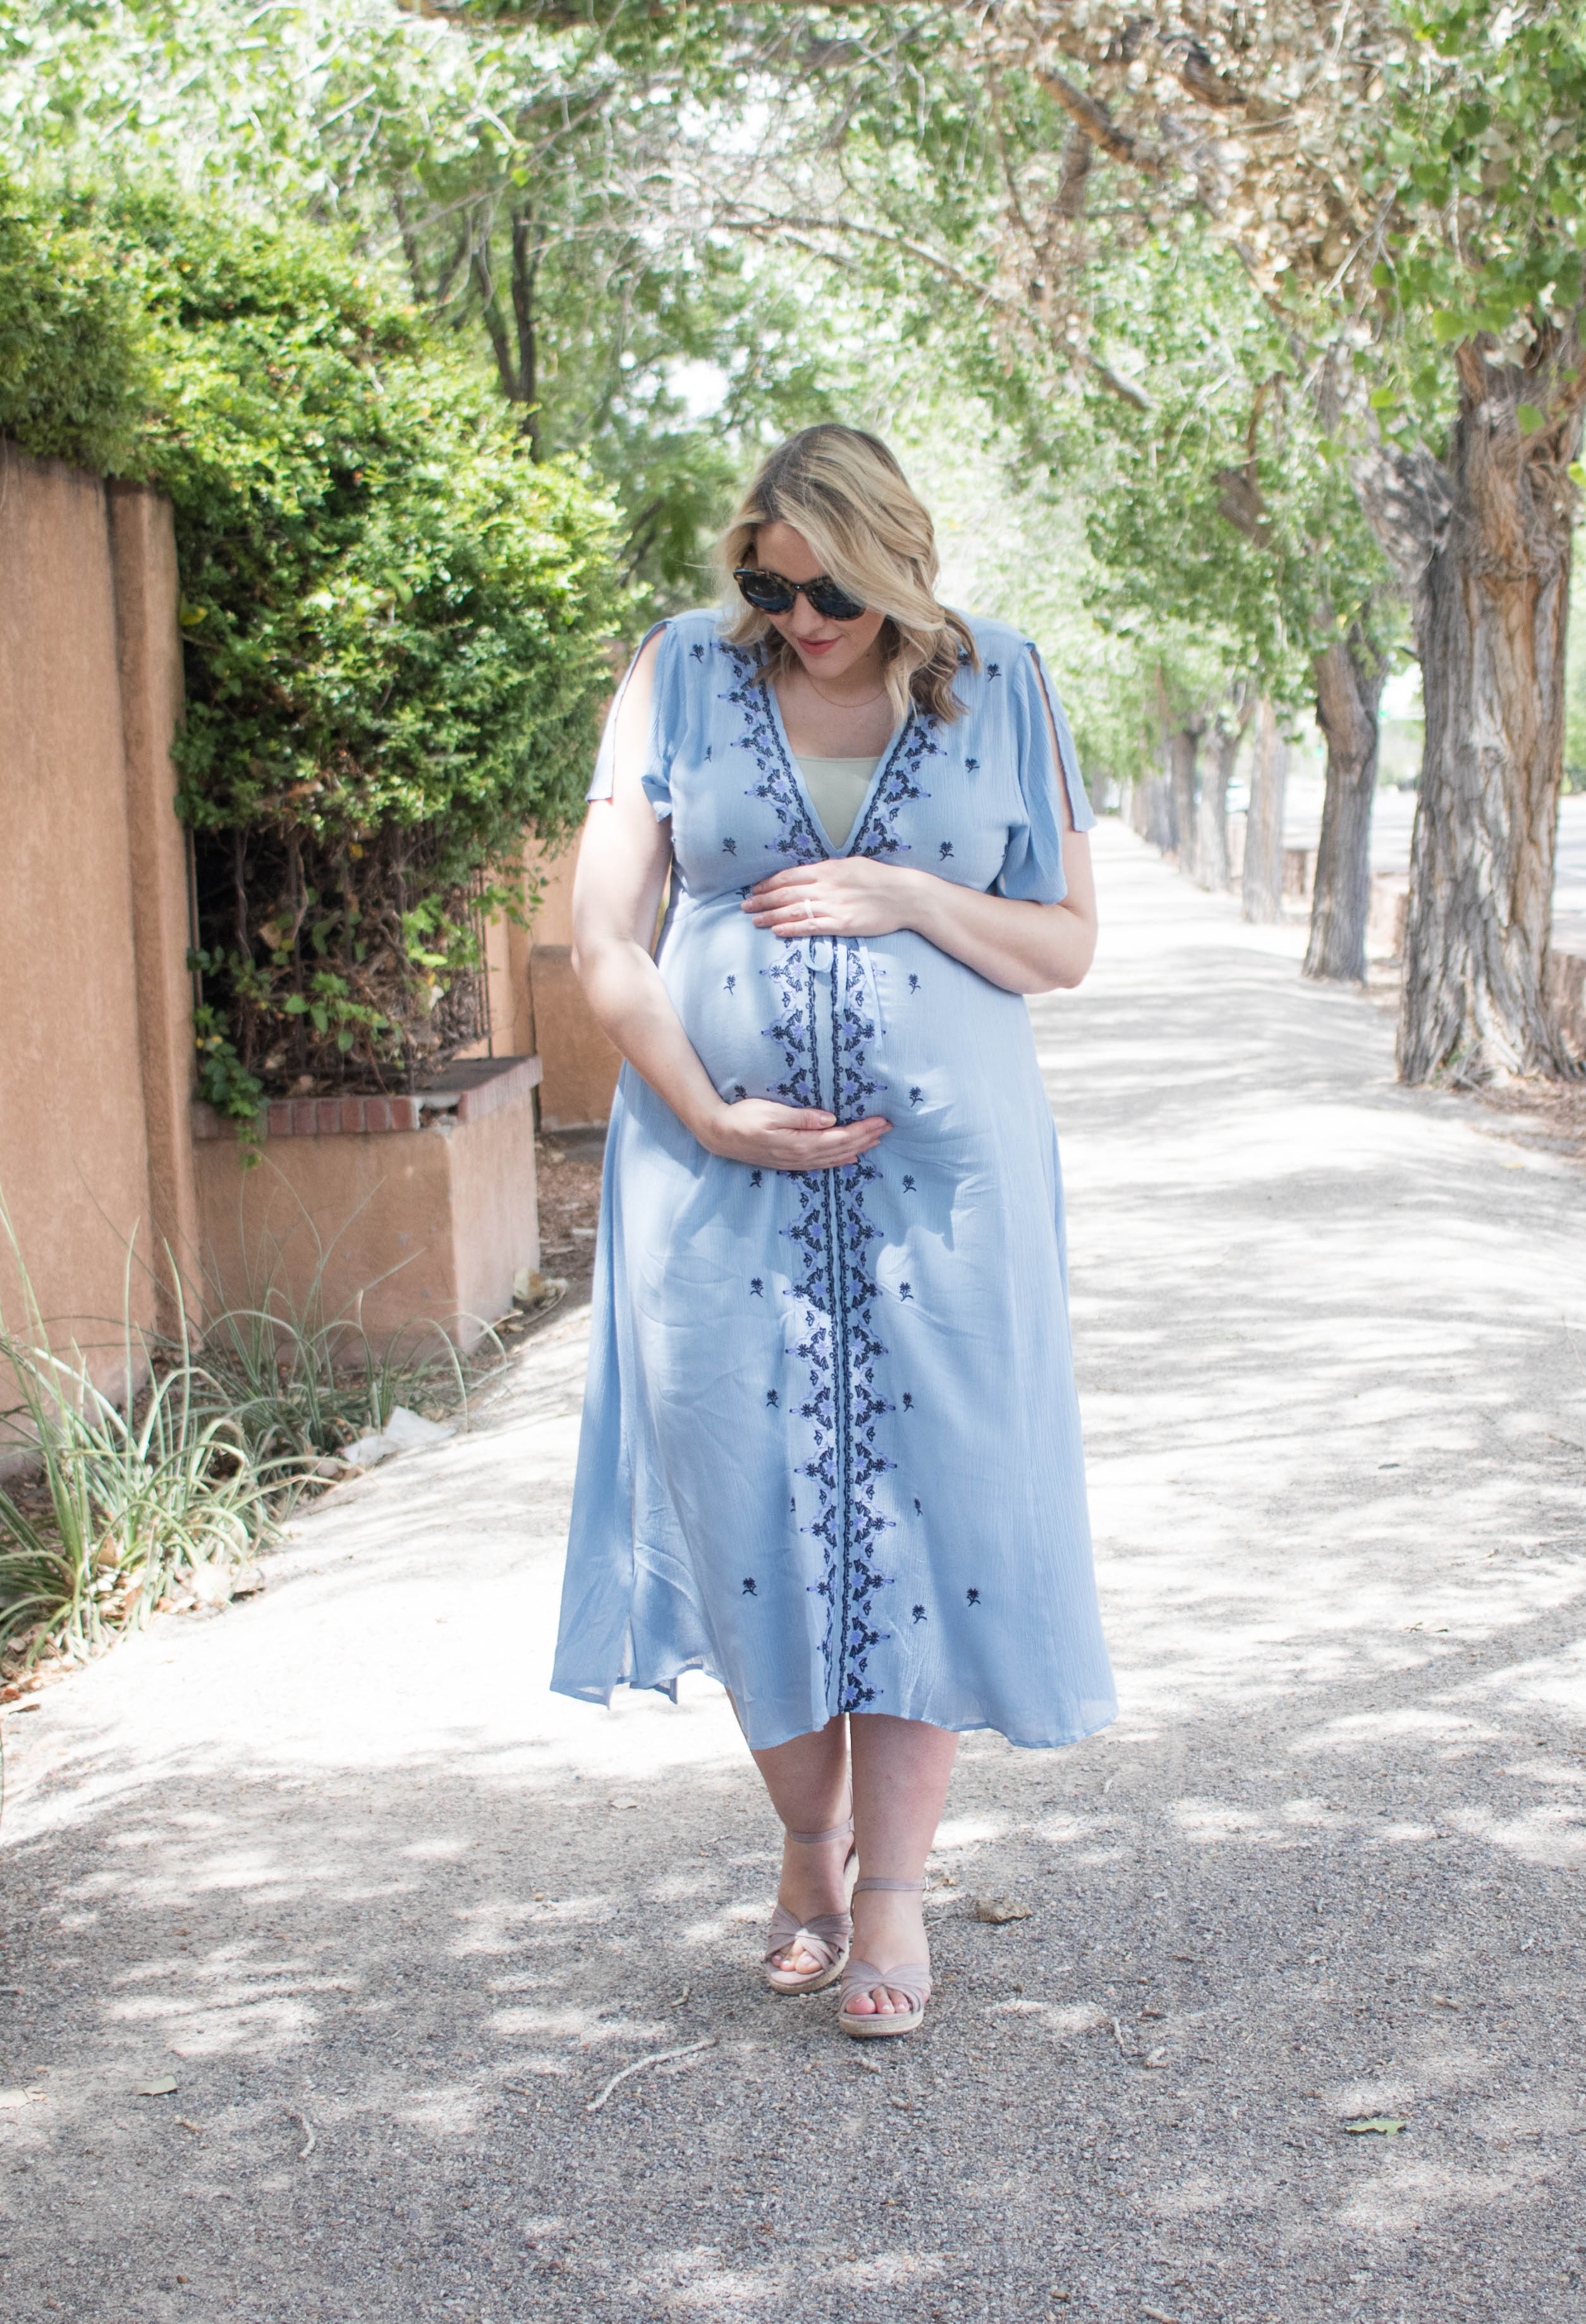 non-maternity dress that's perfect for a bump #maternitydress #maternityfashion #pregnant #pregnancystyle